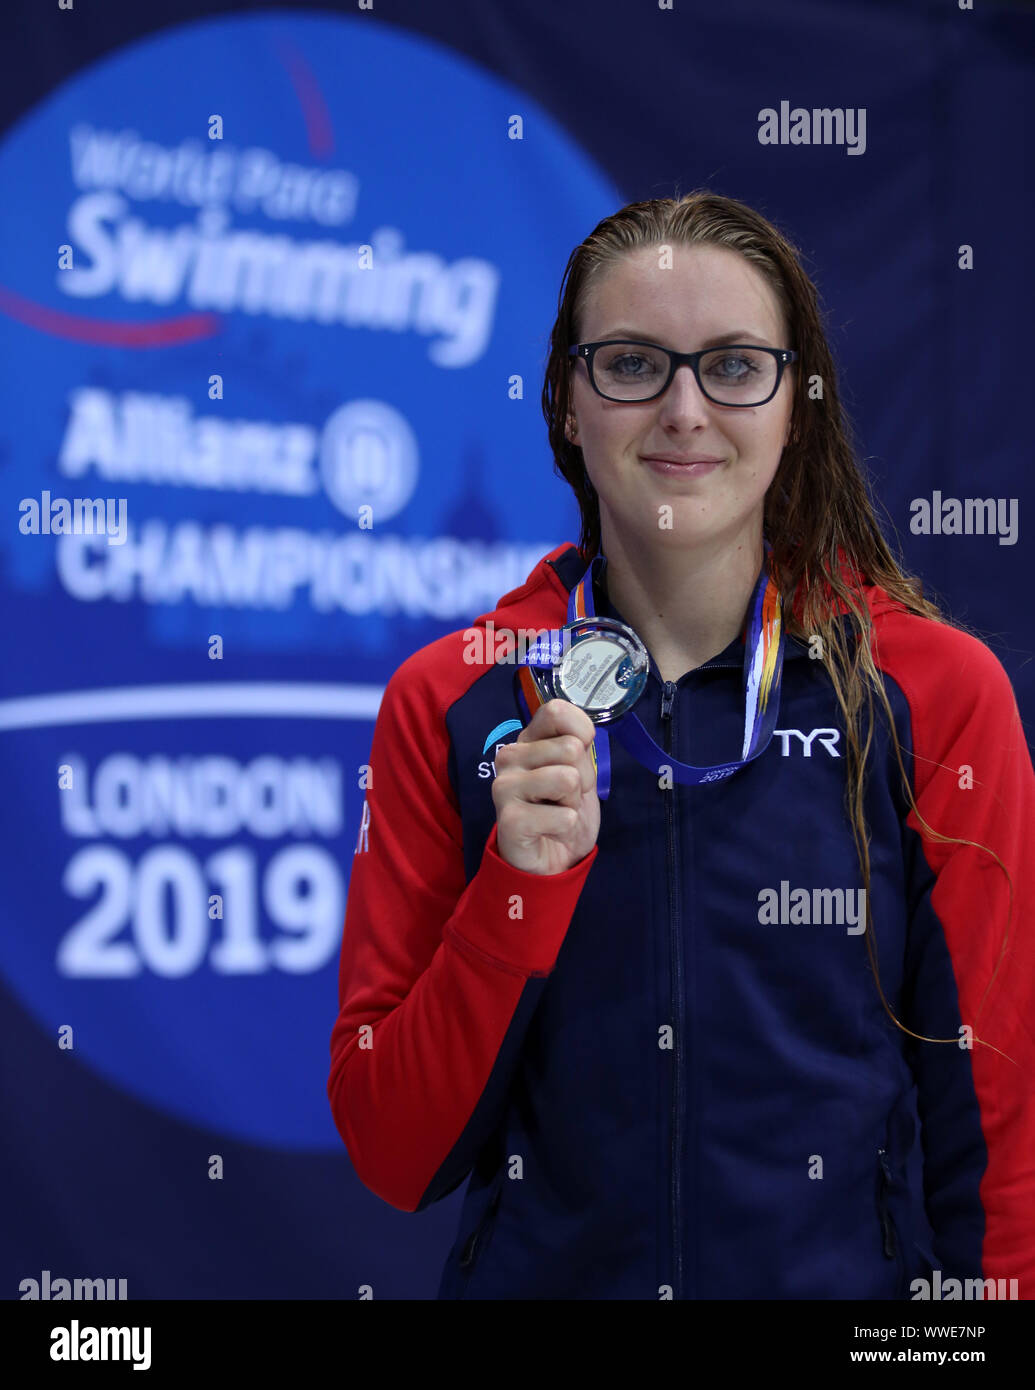 Great Britains Jessica Jane Applegate Poses With Her Silver Medal In